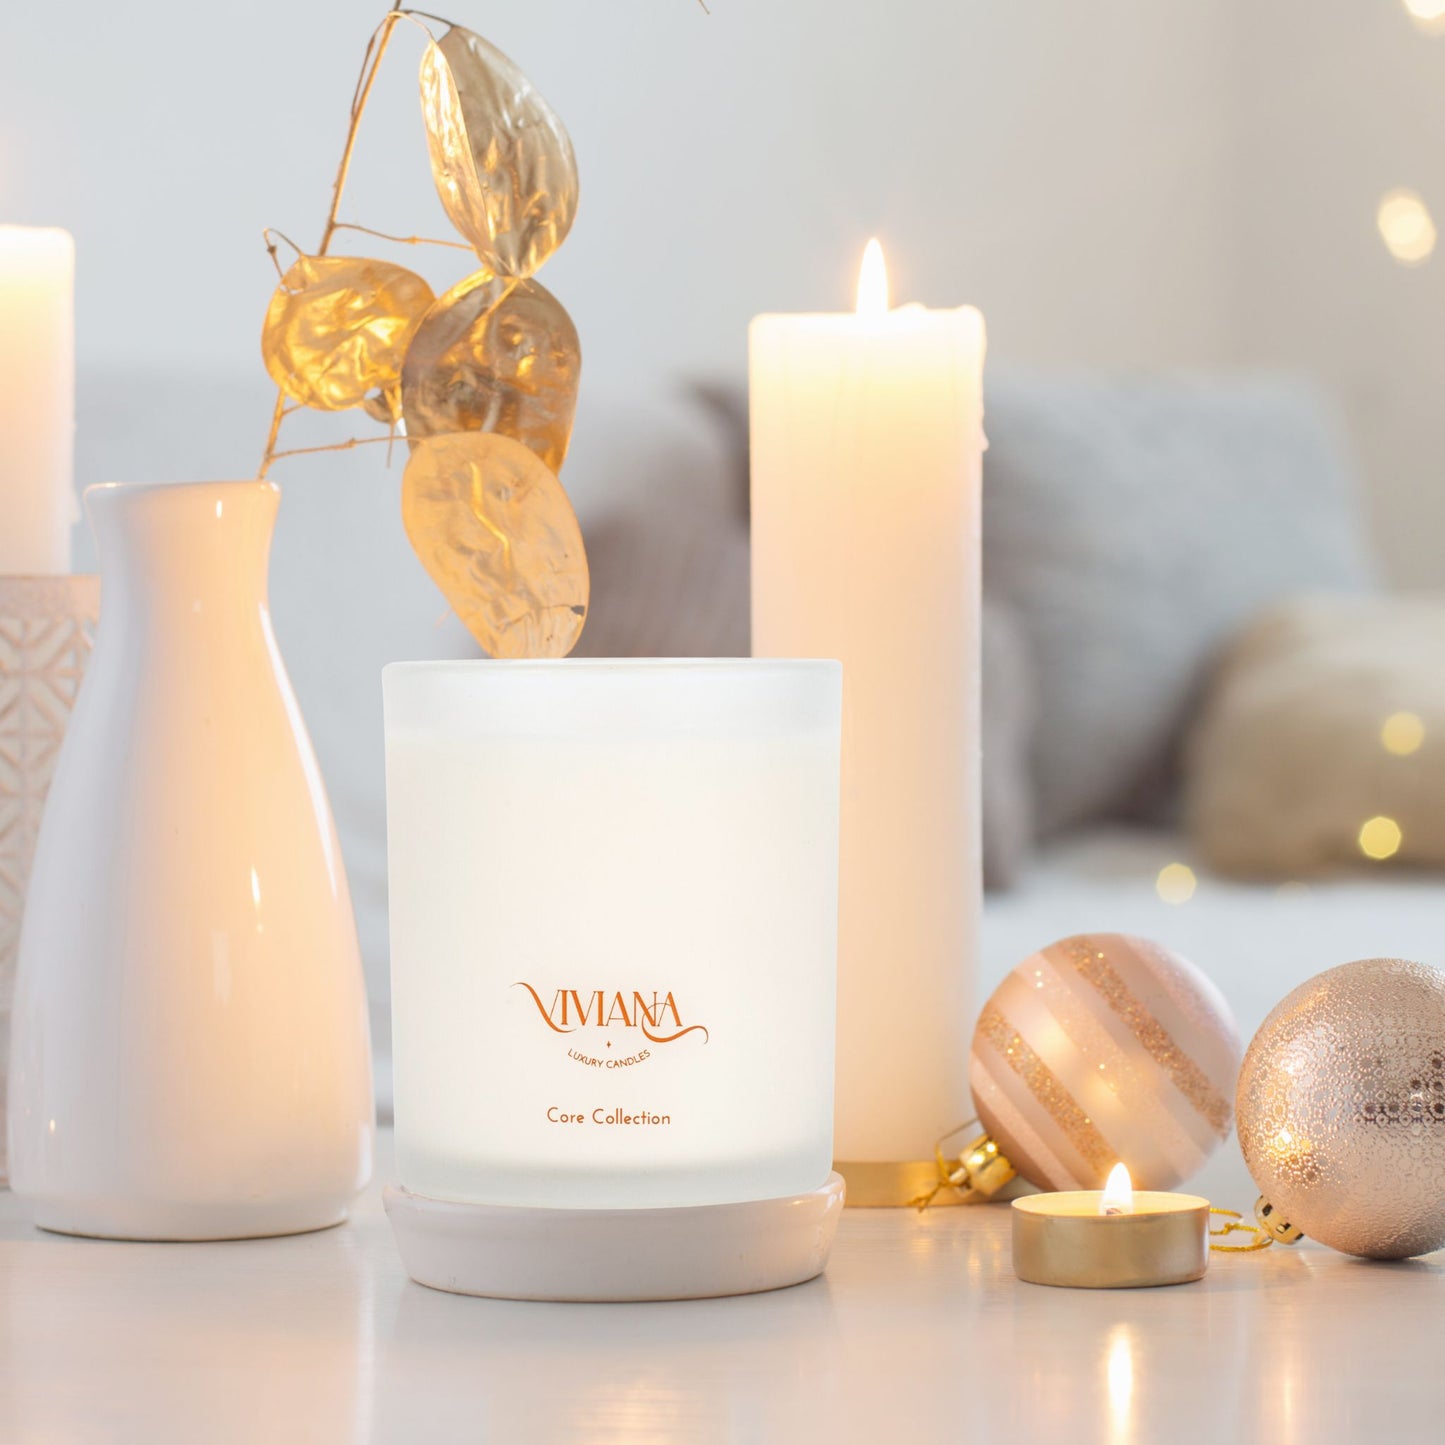 Best holiday candle is winter eucalyptus from Viviana Luxury